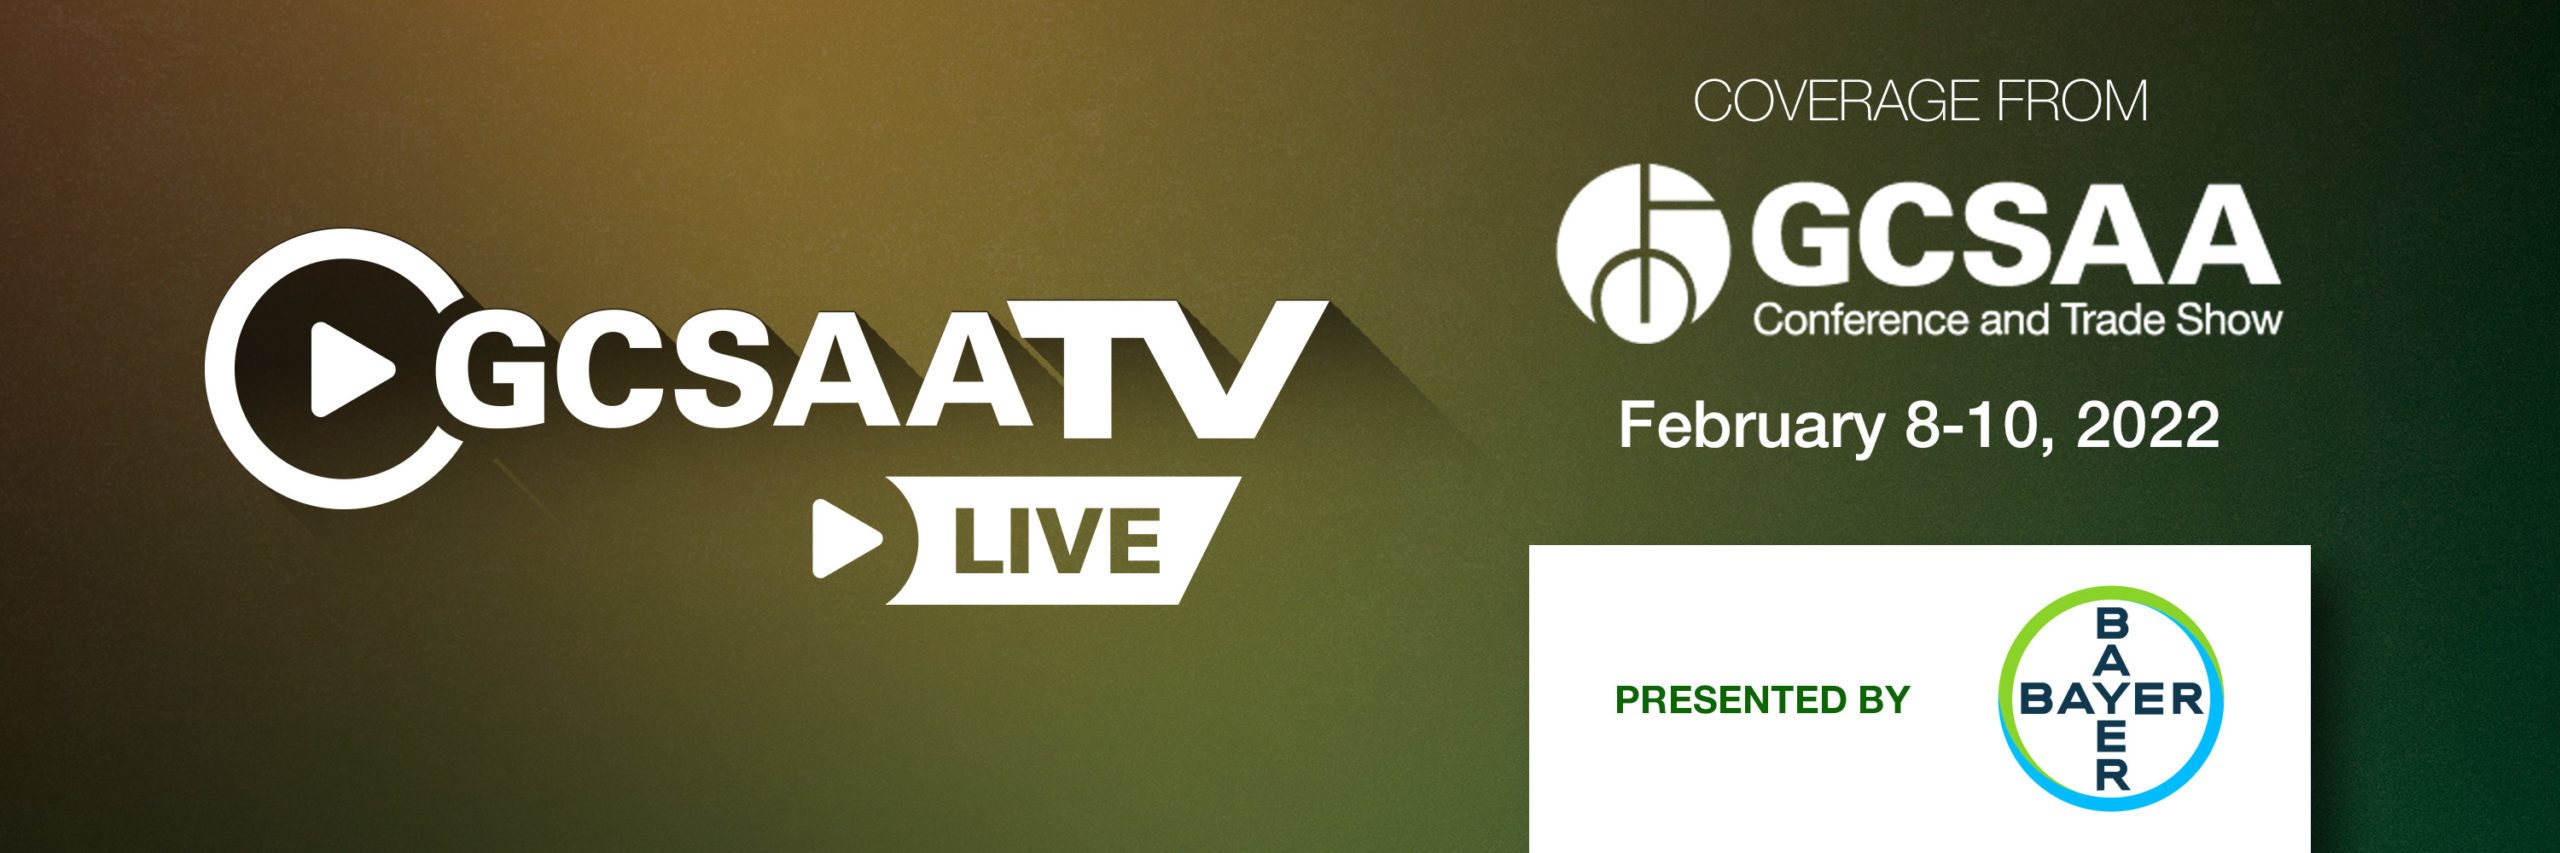 Header image for 2022 GCSAA TV Live coverage from 2022 GCSAA Conference and Trade Show